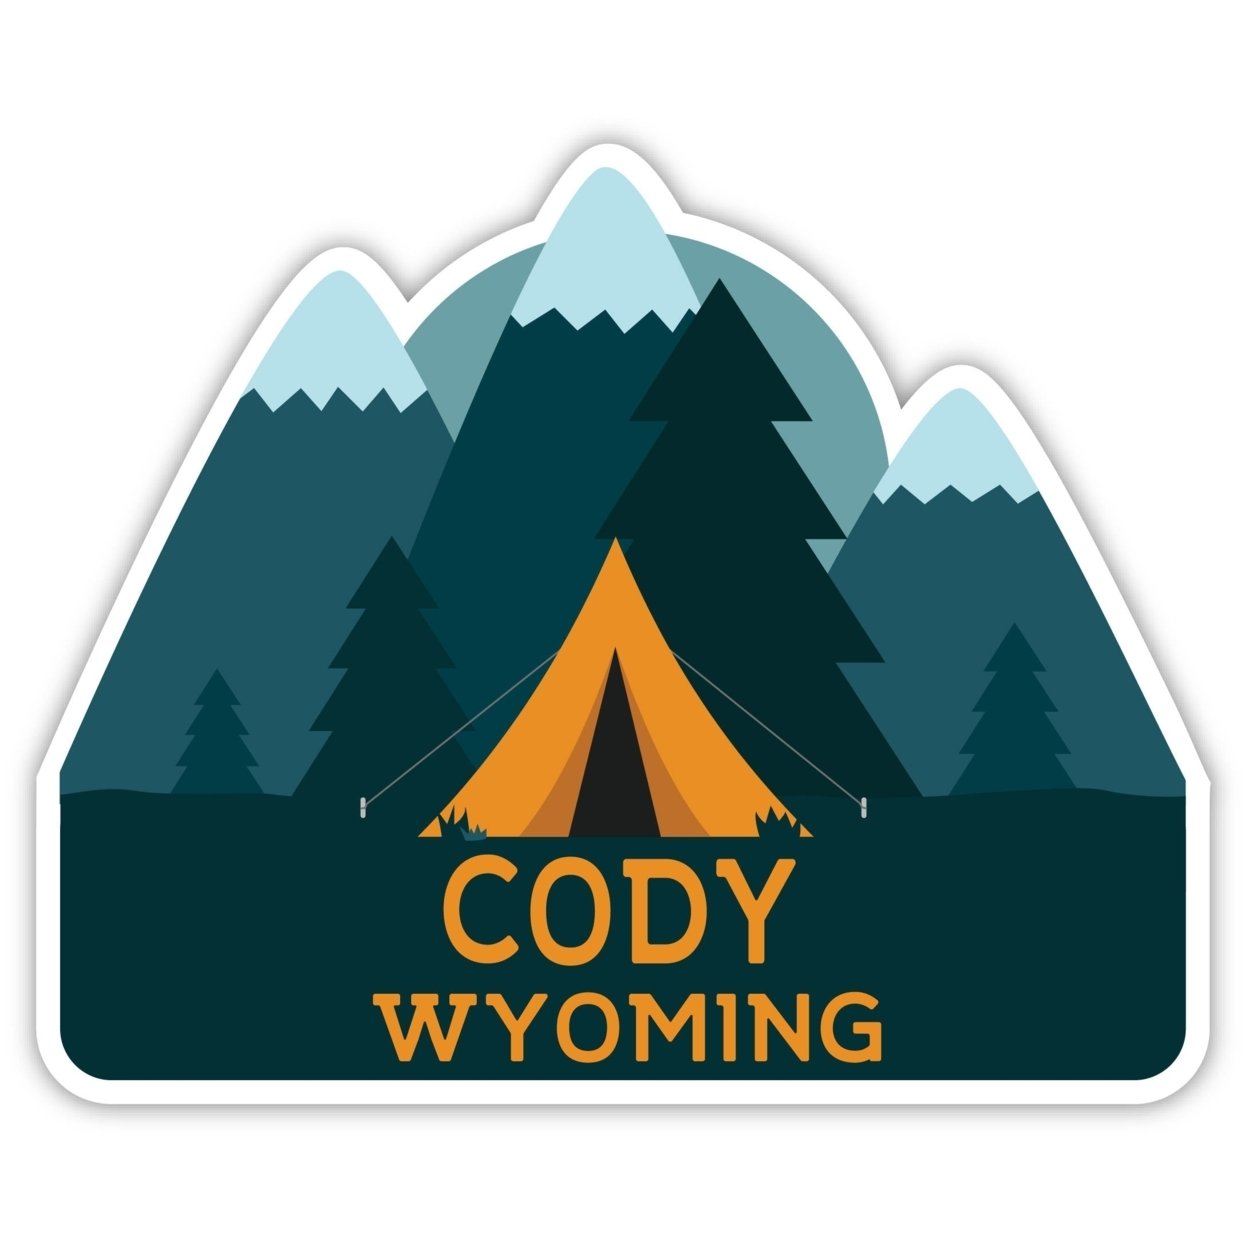 Cody Wyoming Souvenir Decorative Stickers (Choose Theme And Size) - 4-Pack, 6-Inch, Adventures Awaits